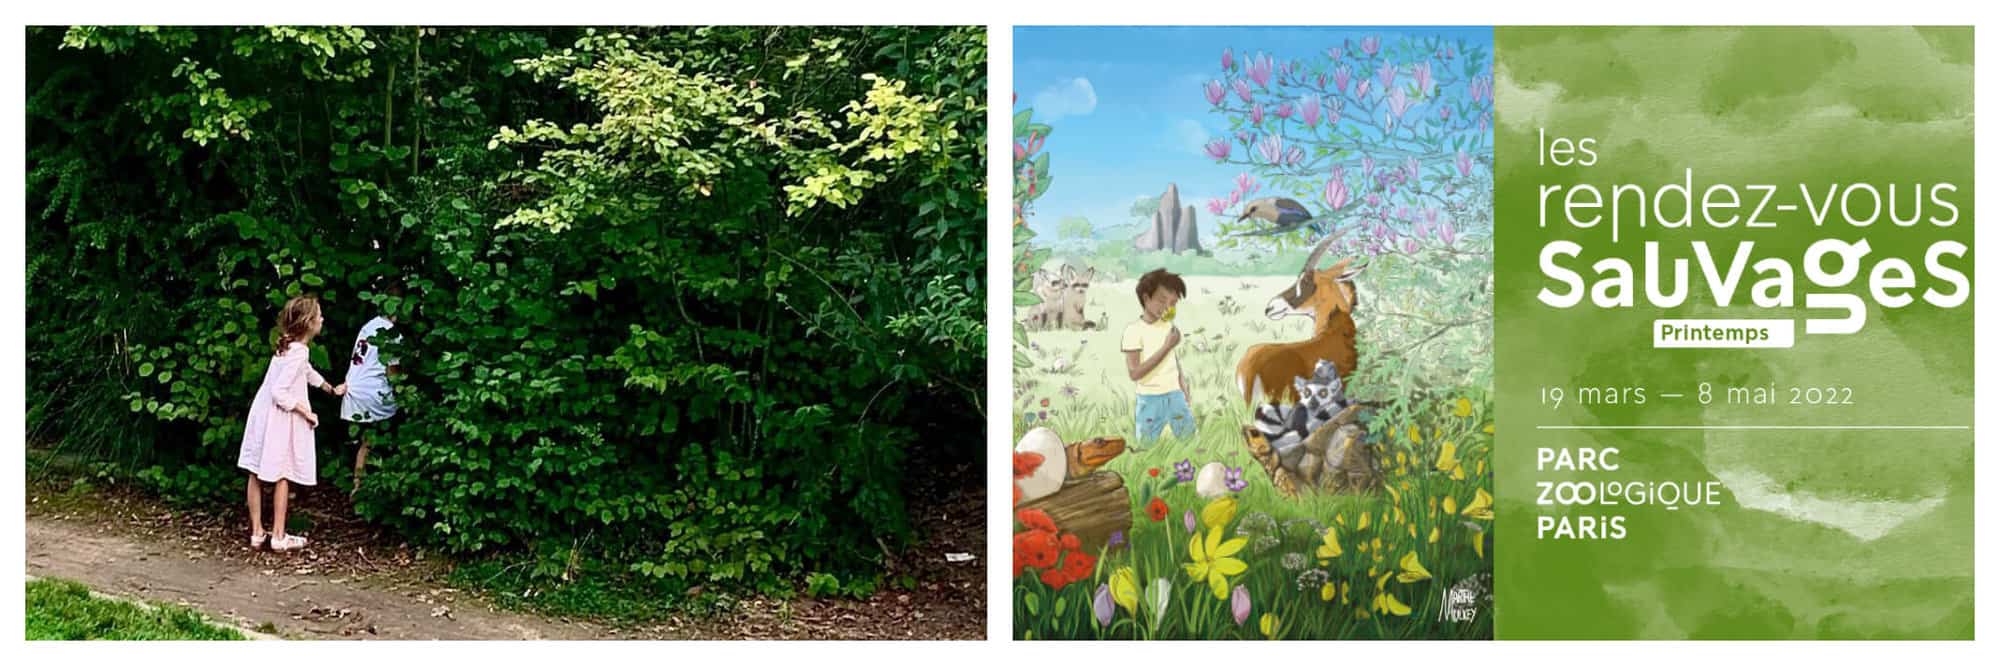 Left- 2 children peak through green bushes in a park. Right- A park with a boy and animals are shown in an ad for the Zoologique Paris.